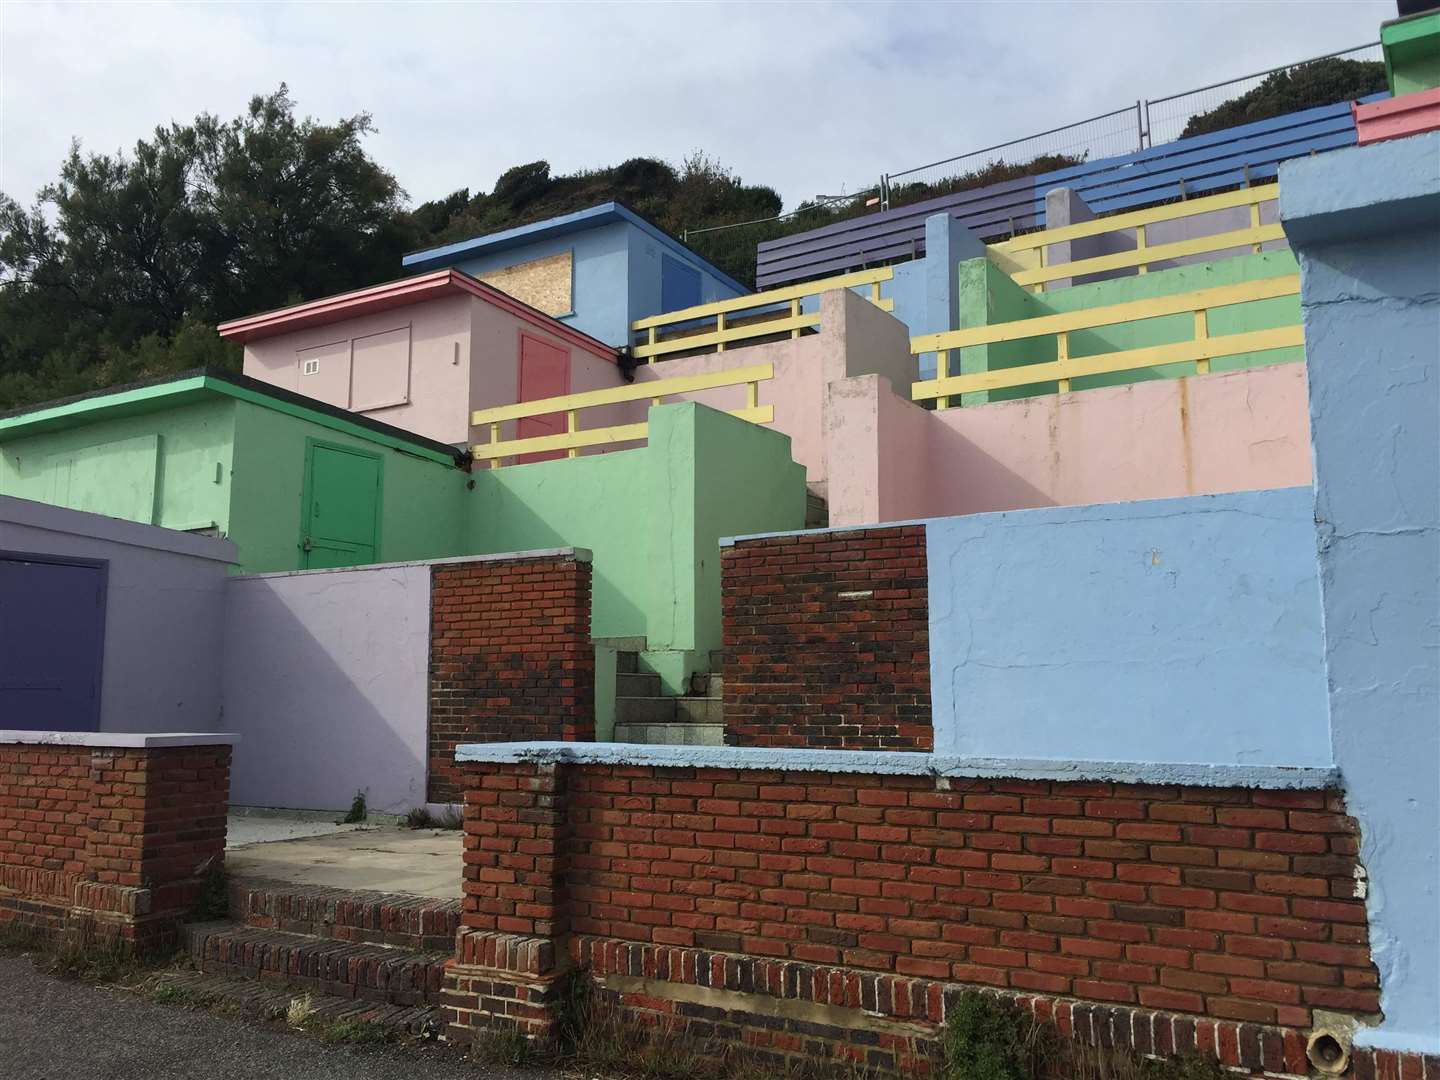 These huts are expected to escape demolition